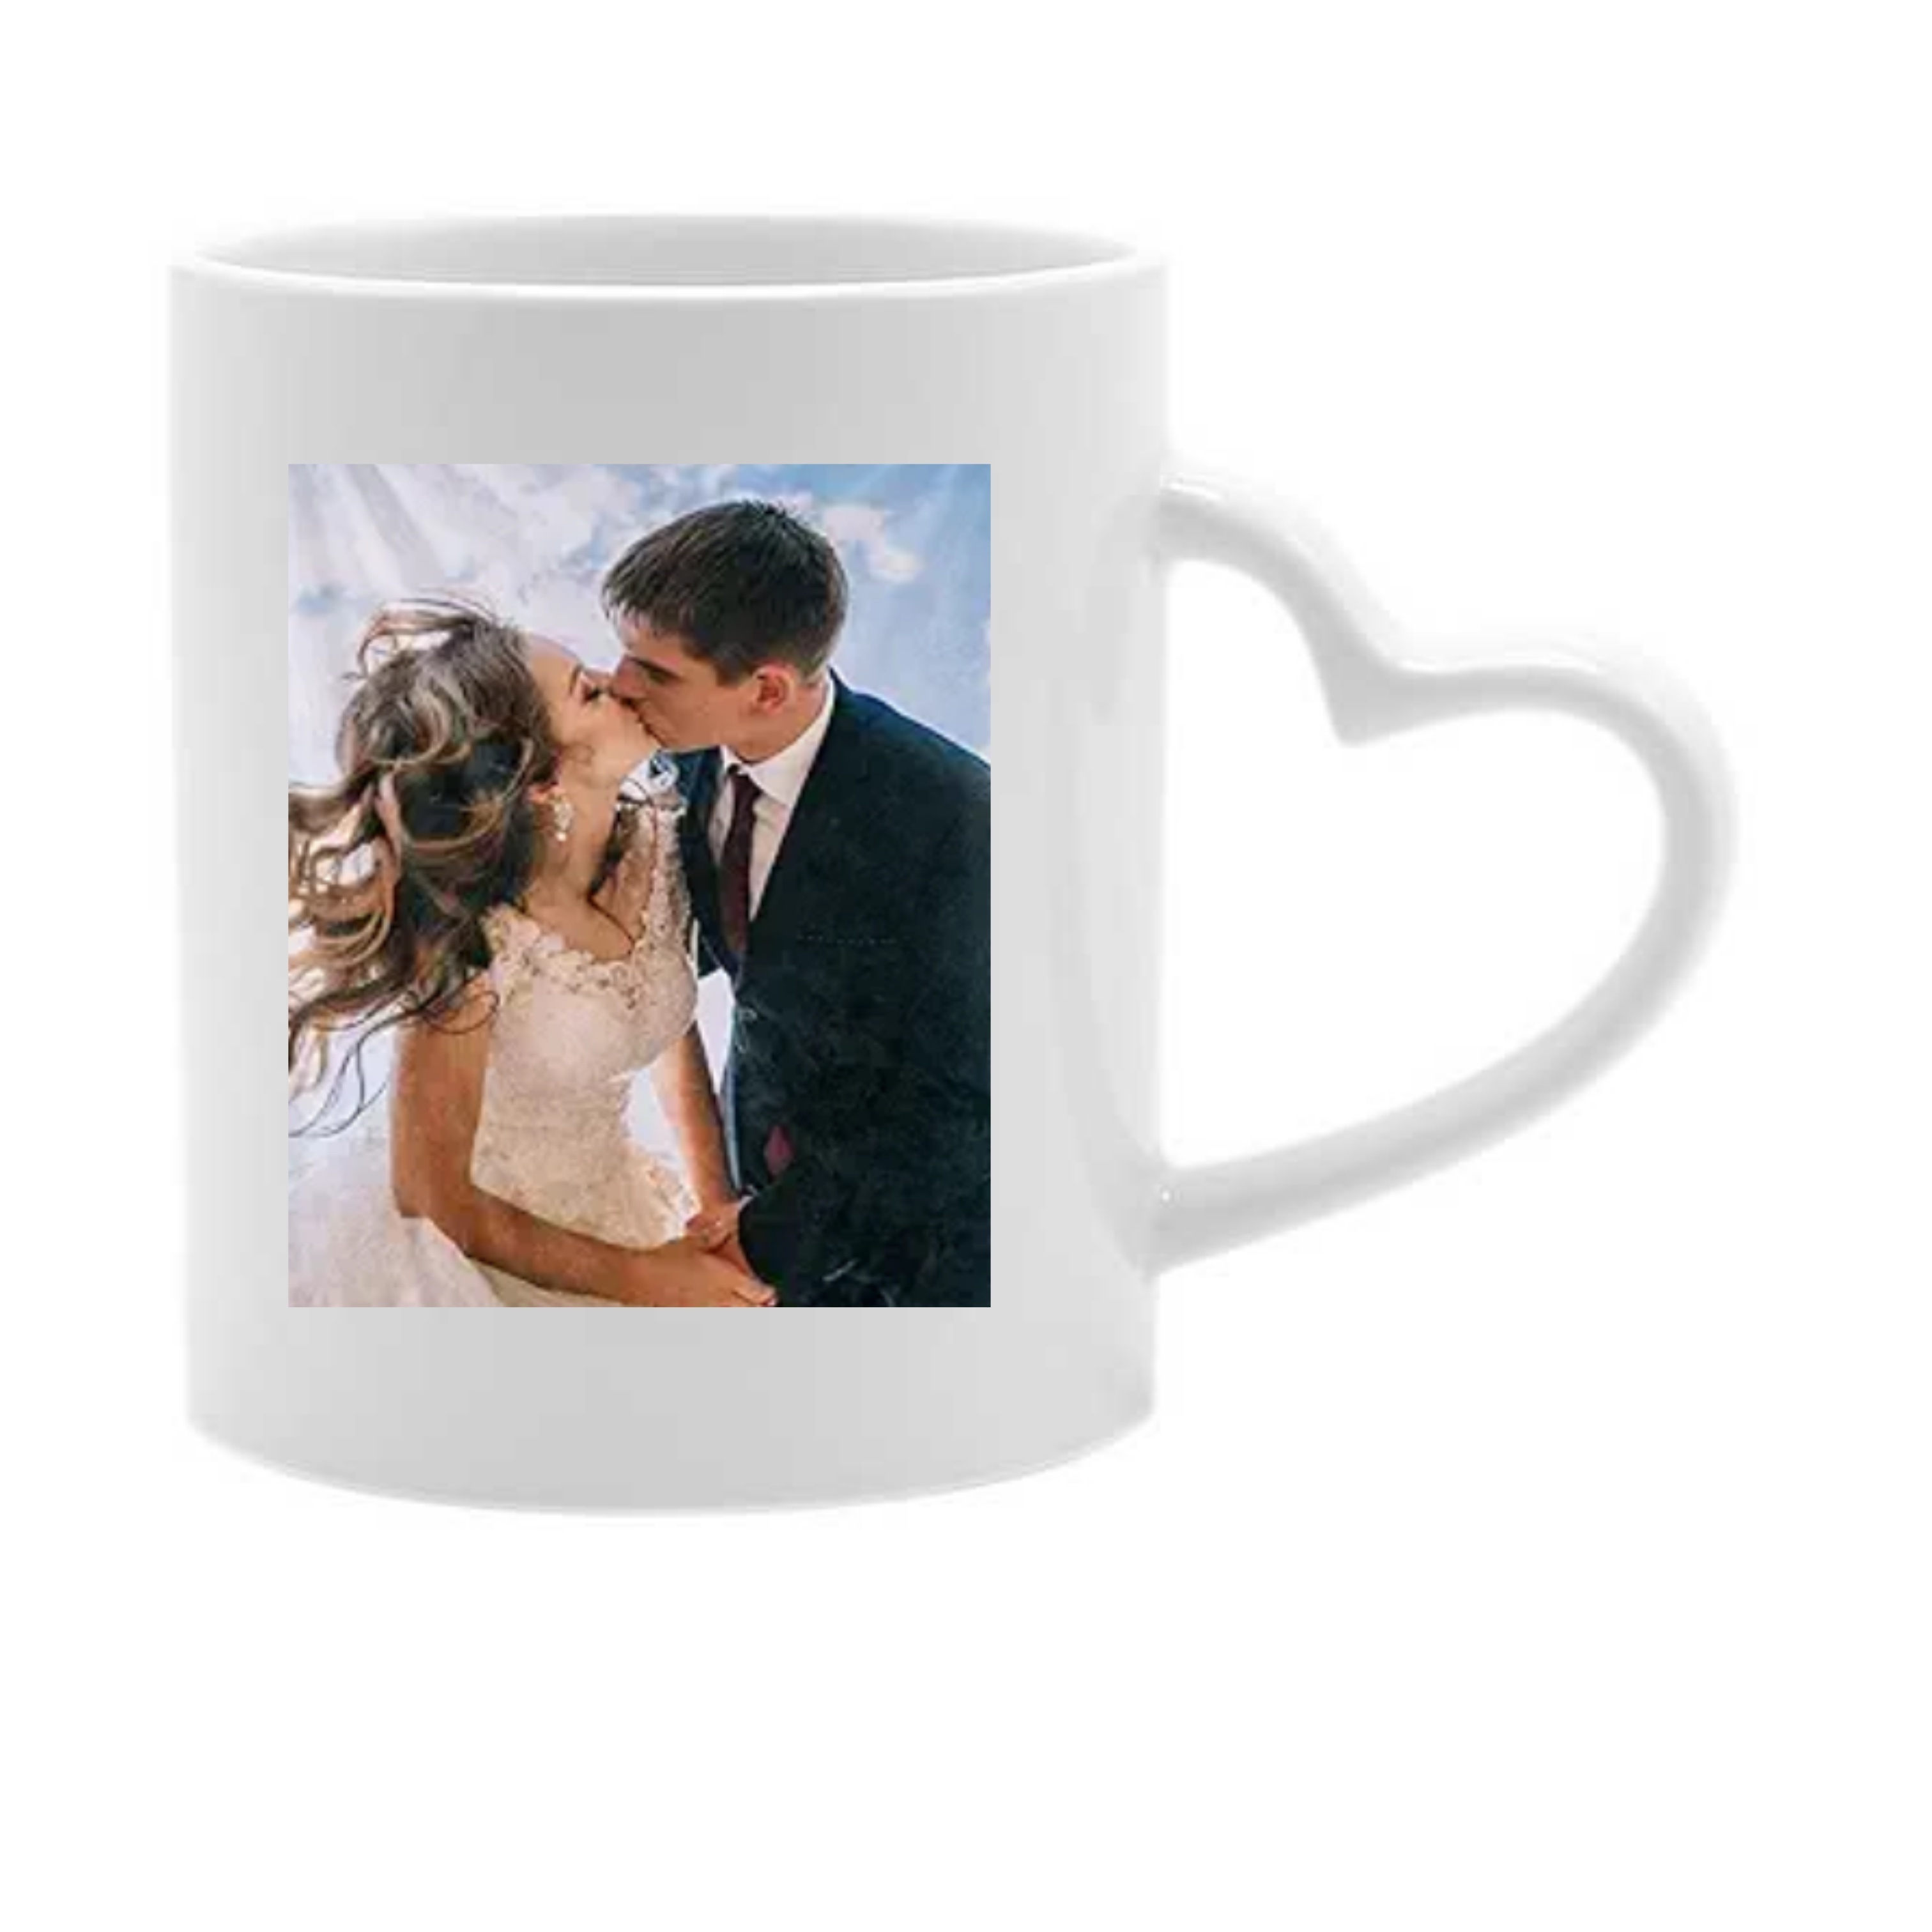 

1pc Personalized Coffee Mug - Design Custom Cup With Photo Text And Logo Novelty Customized Gifts For Men And Women Tea Cup Personalize 11oz Both, For Office